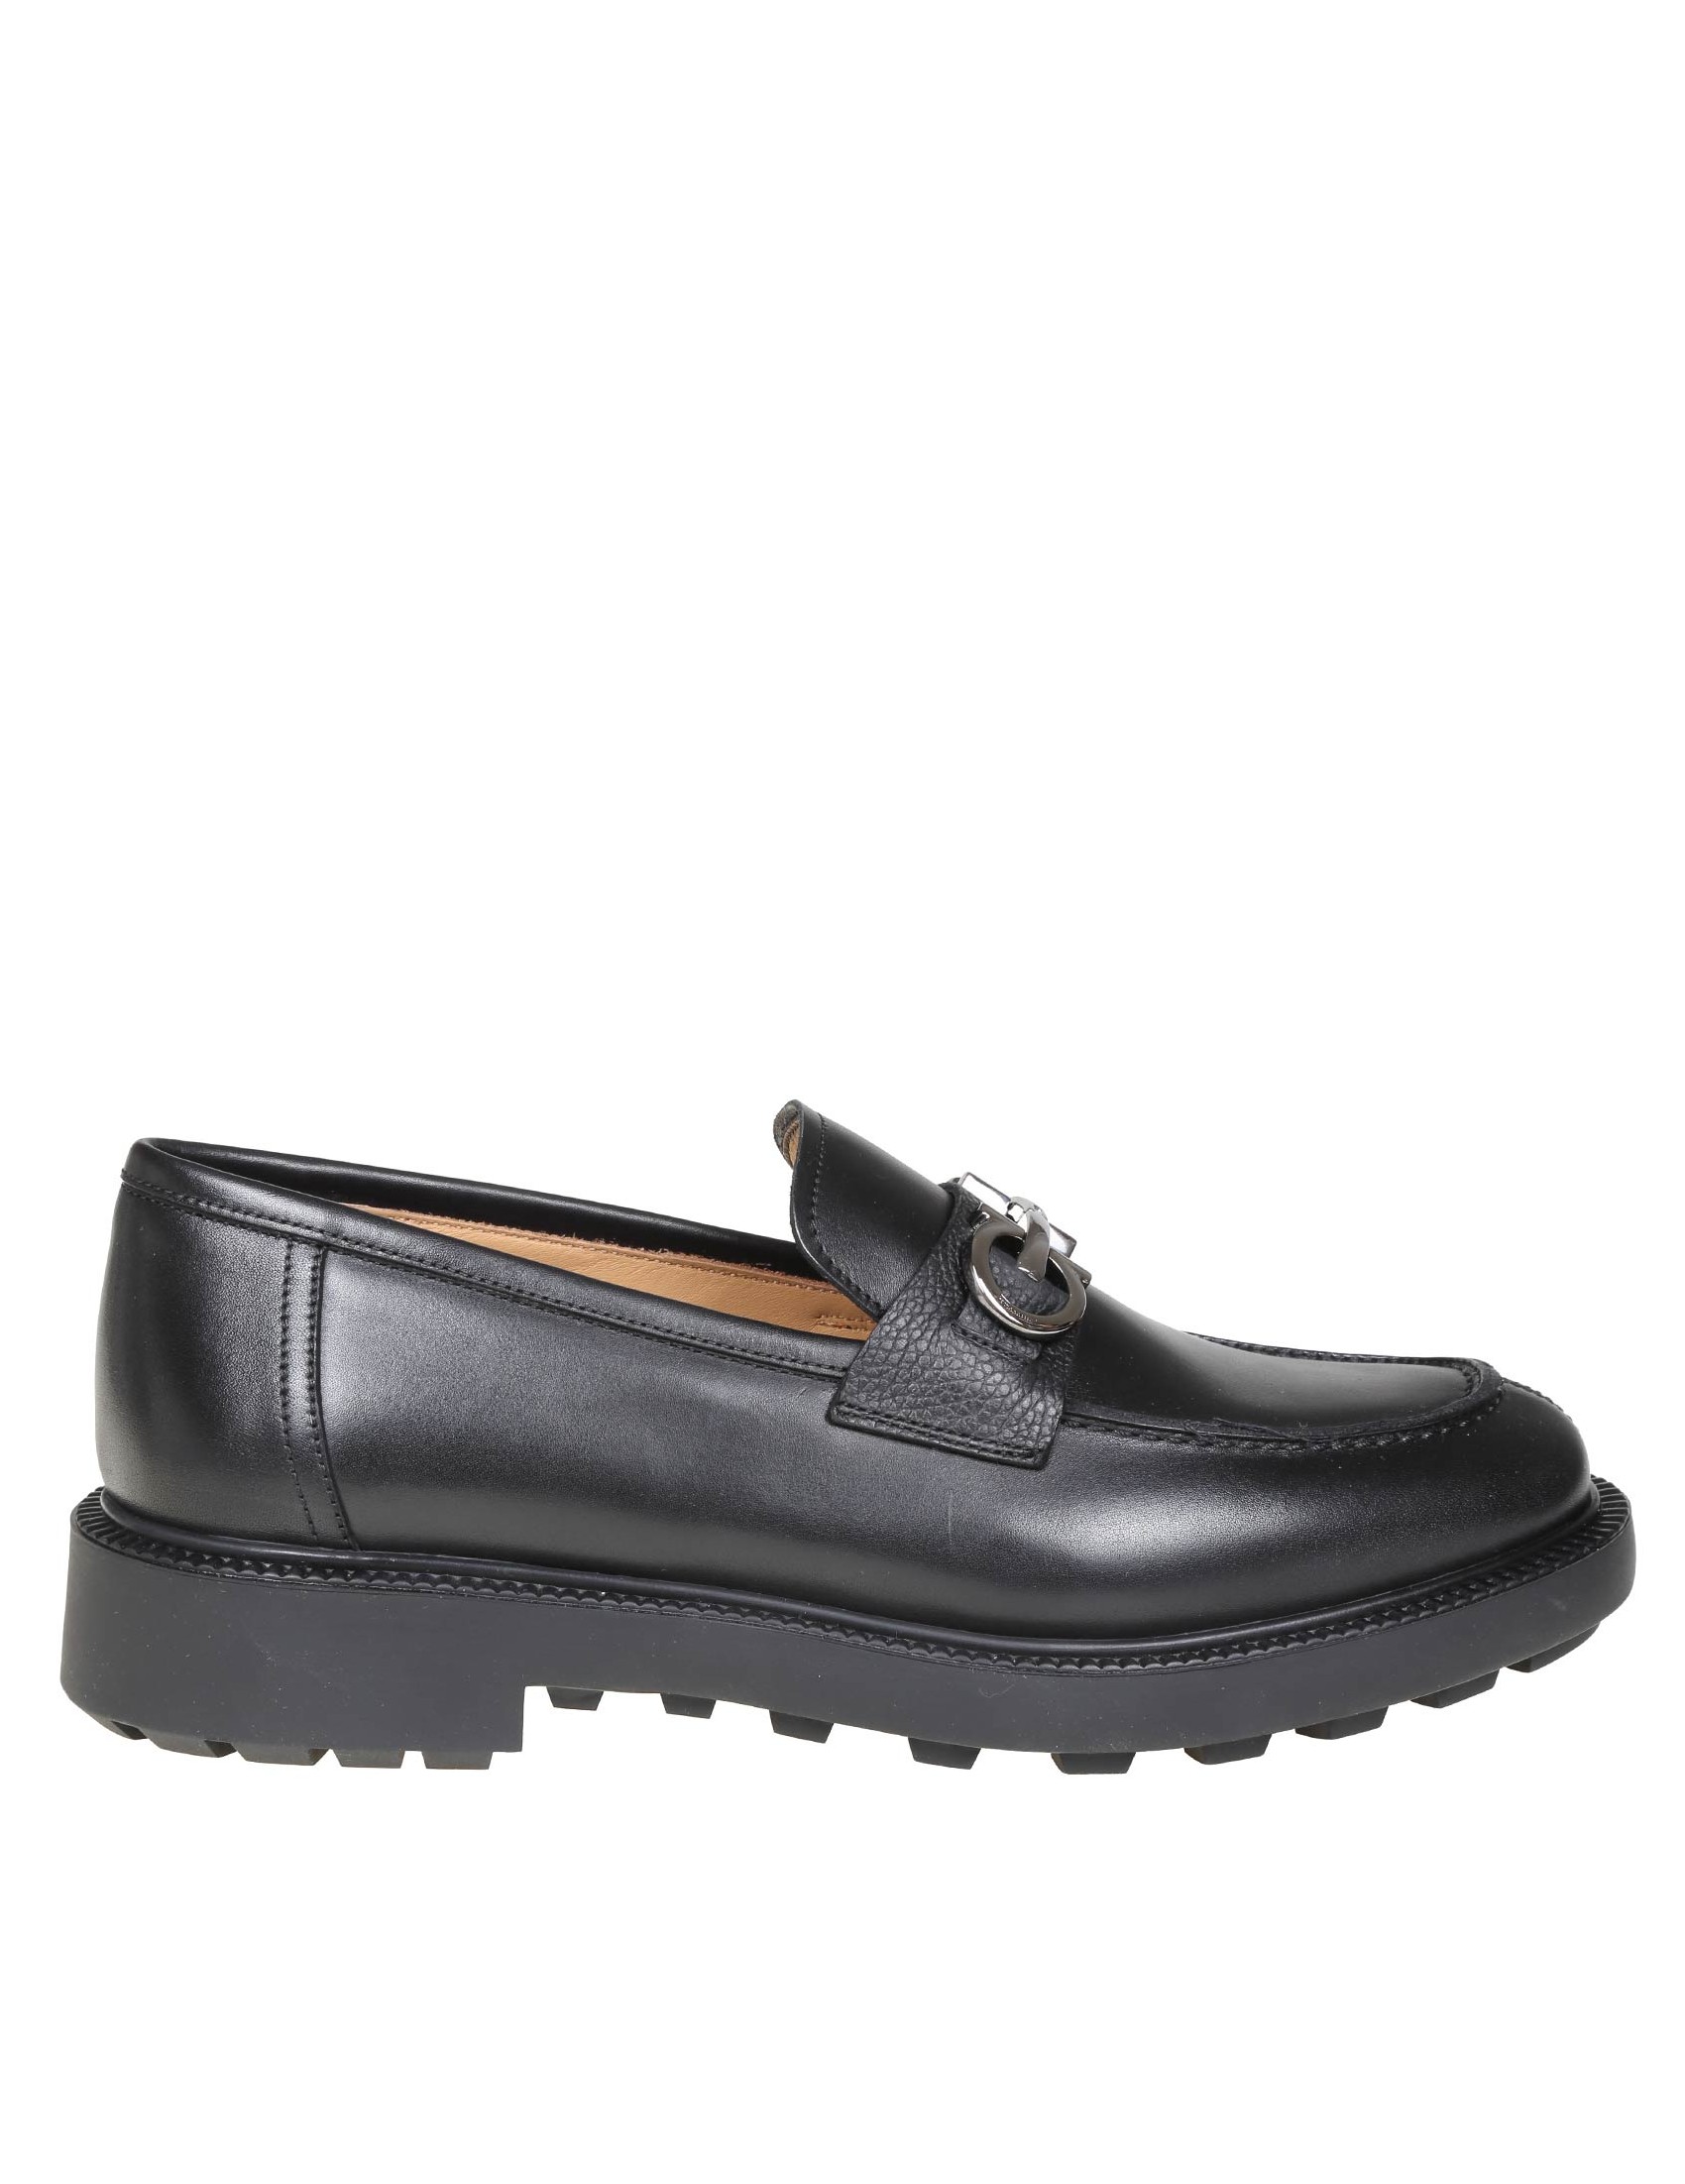 FERRAGAMO GALLES LOAFERS IN LEATHER WITH GANCINI BUCKLE